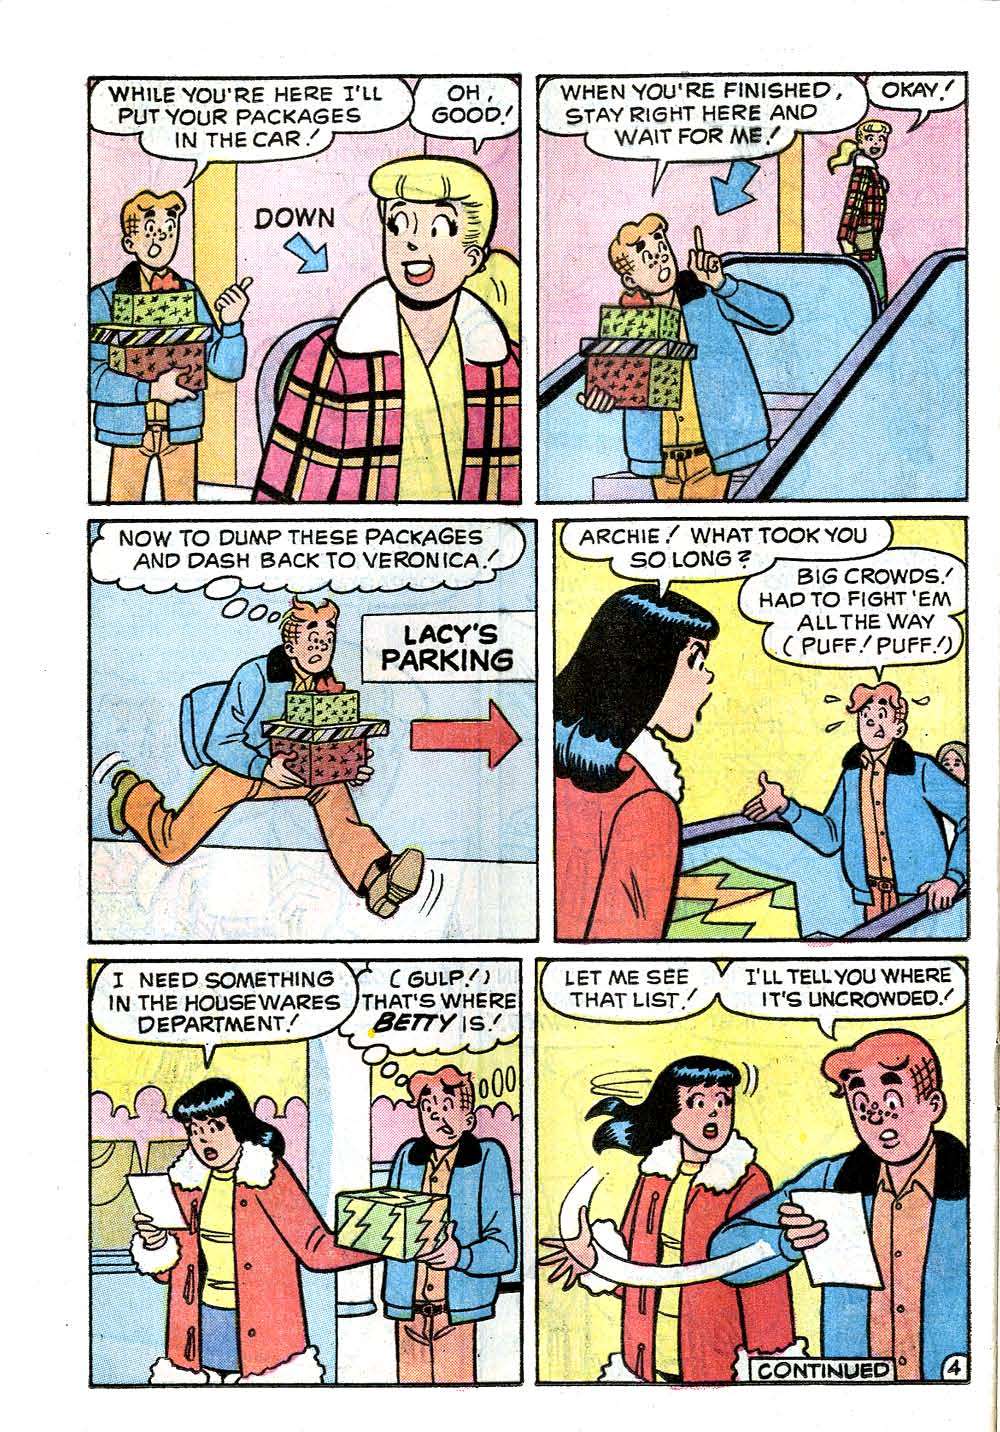 Archie (1960) 232 Page 24